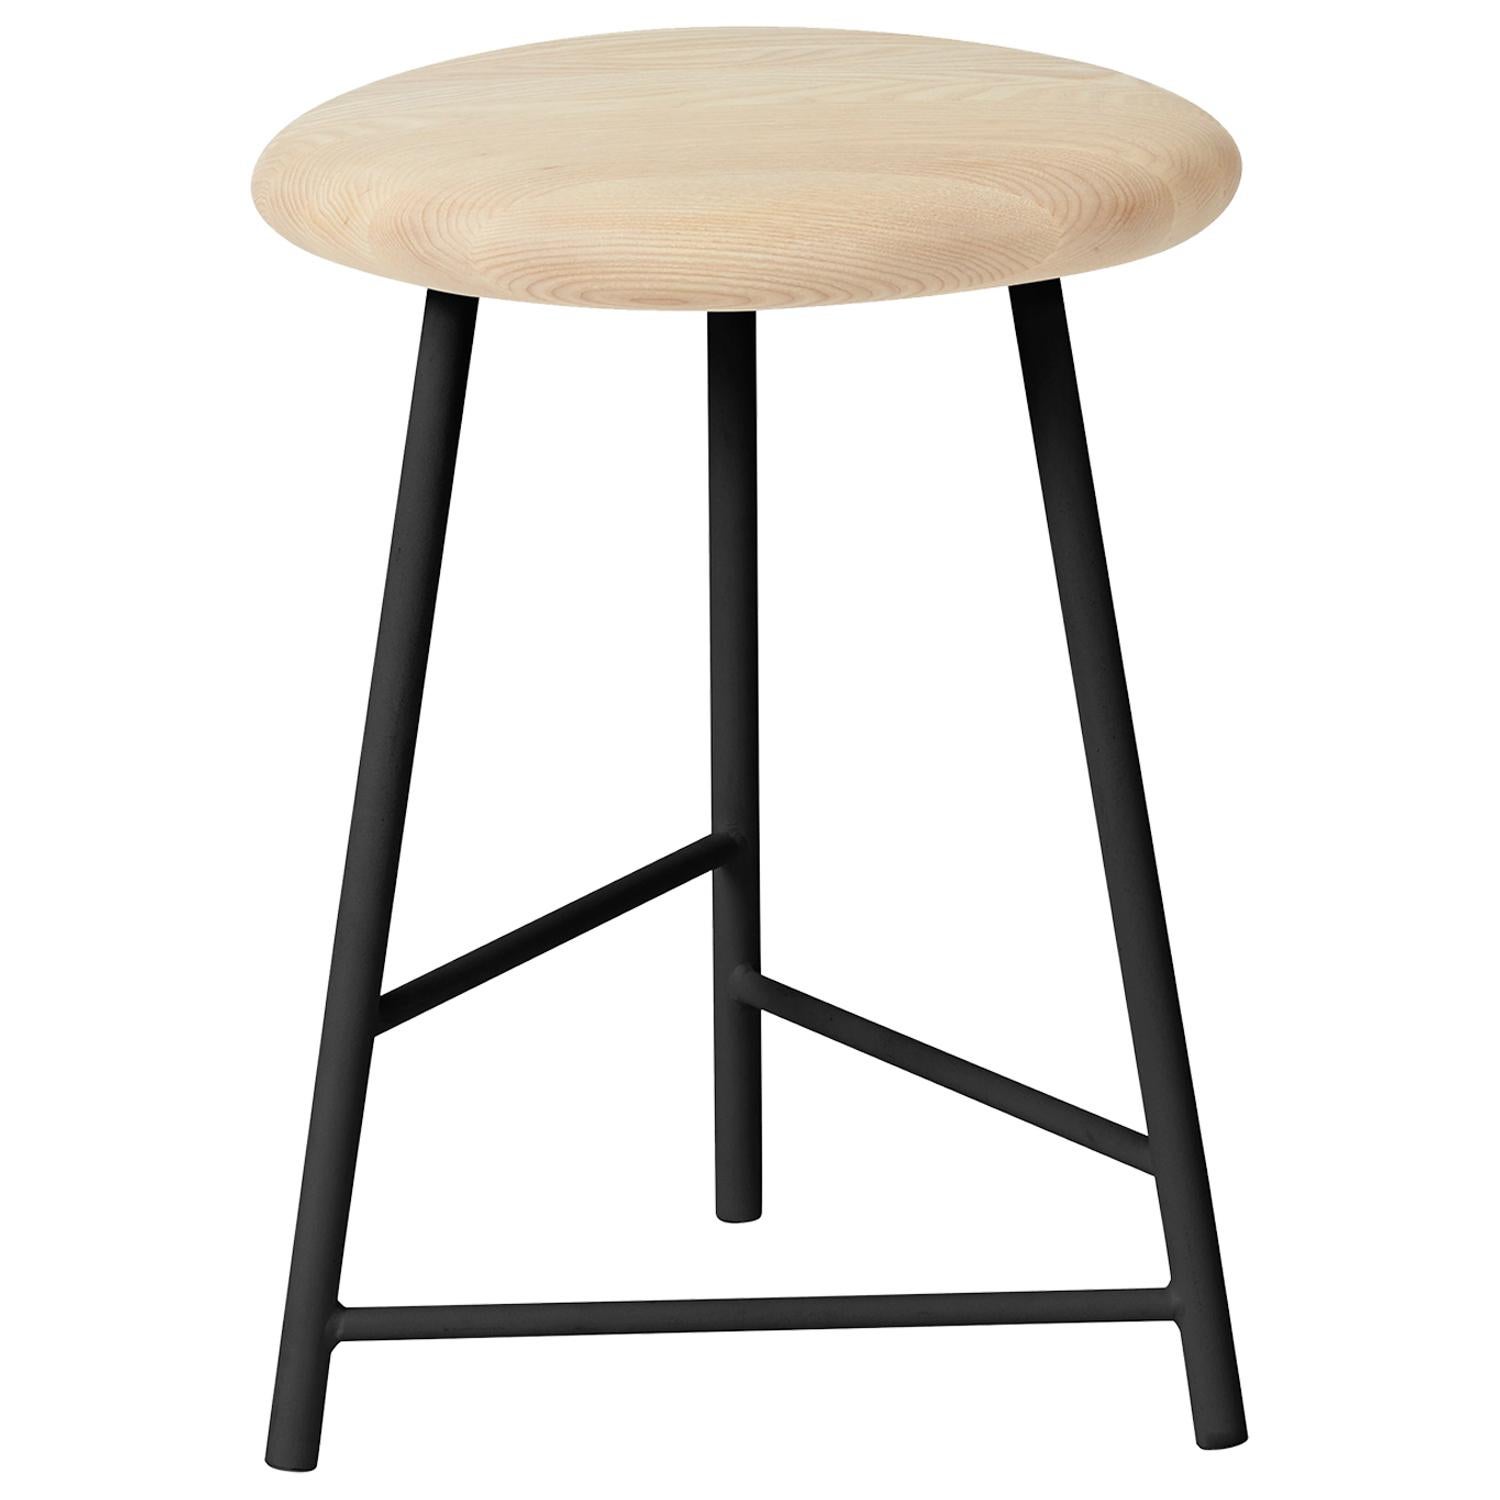 Pebble Stool, by Welling / Ludvik from Warm Nordic